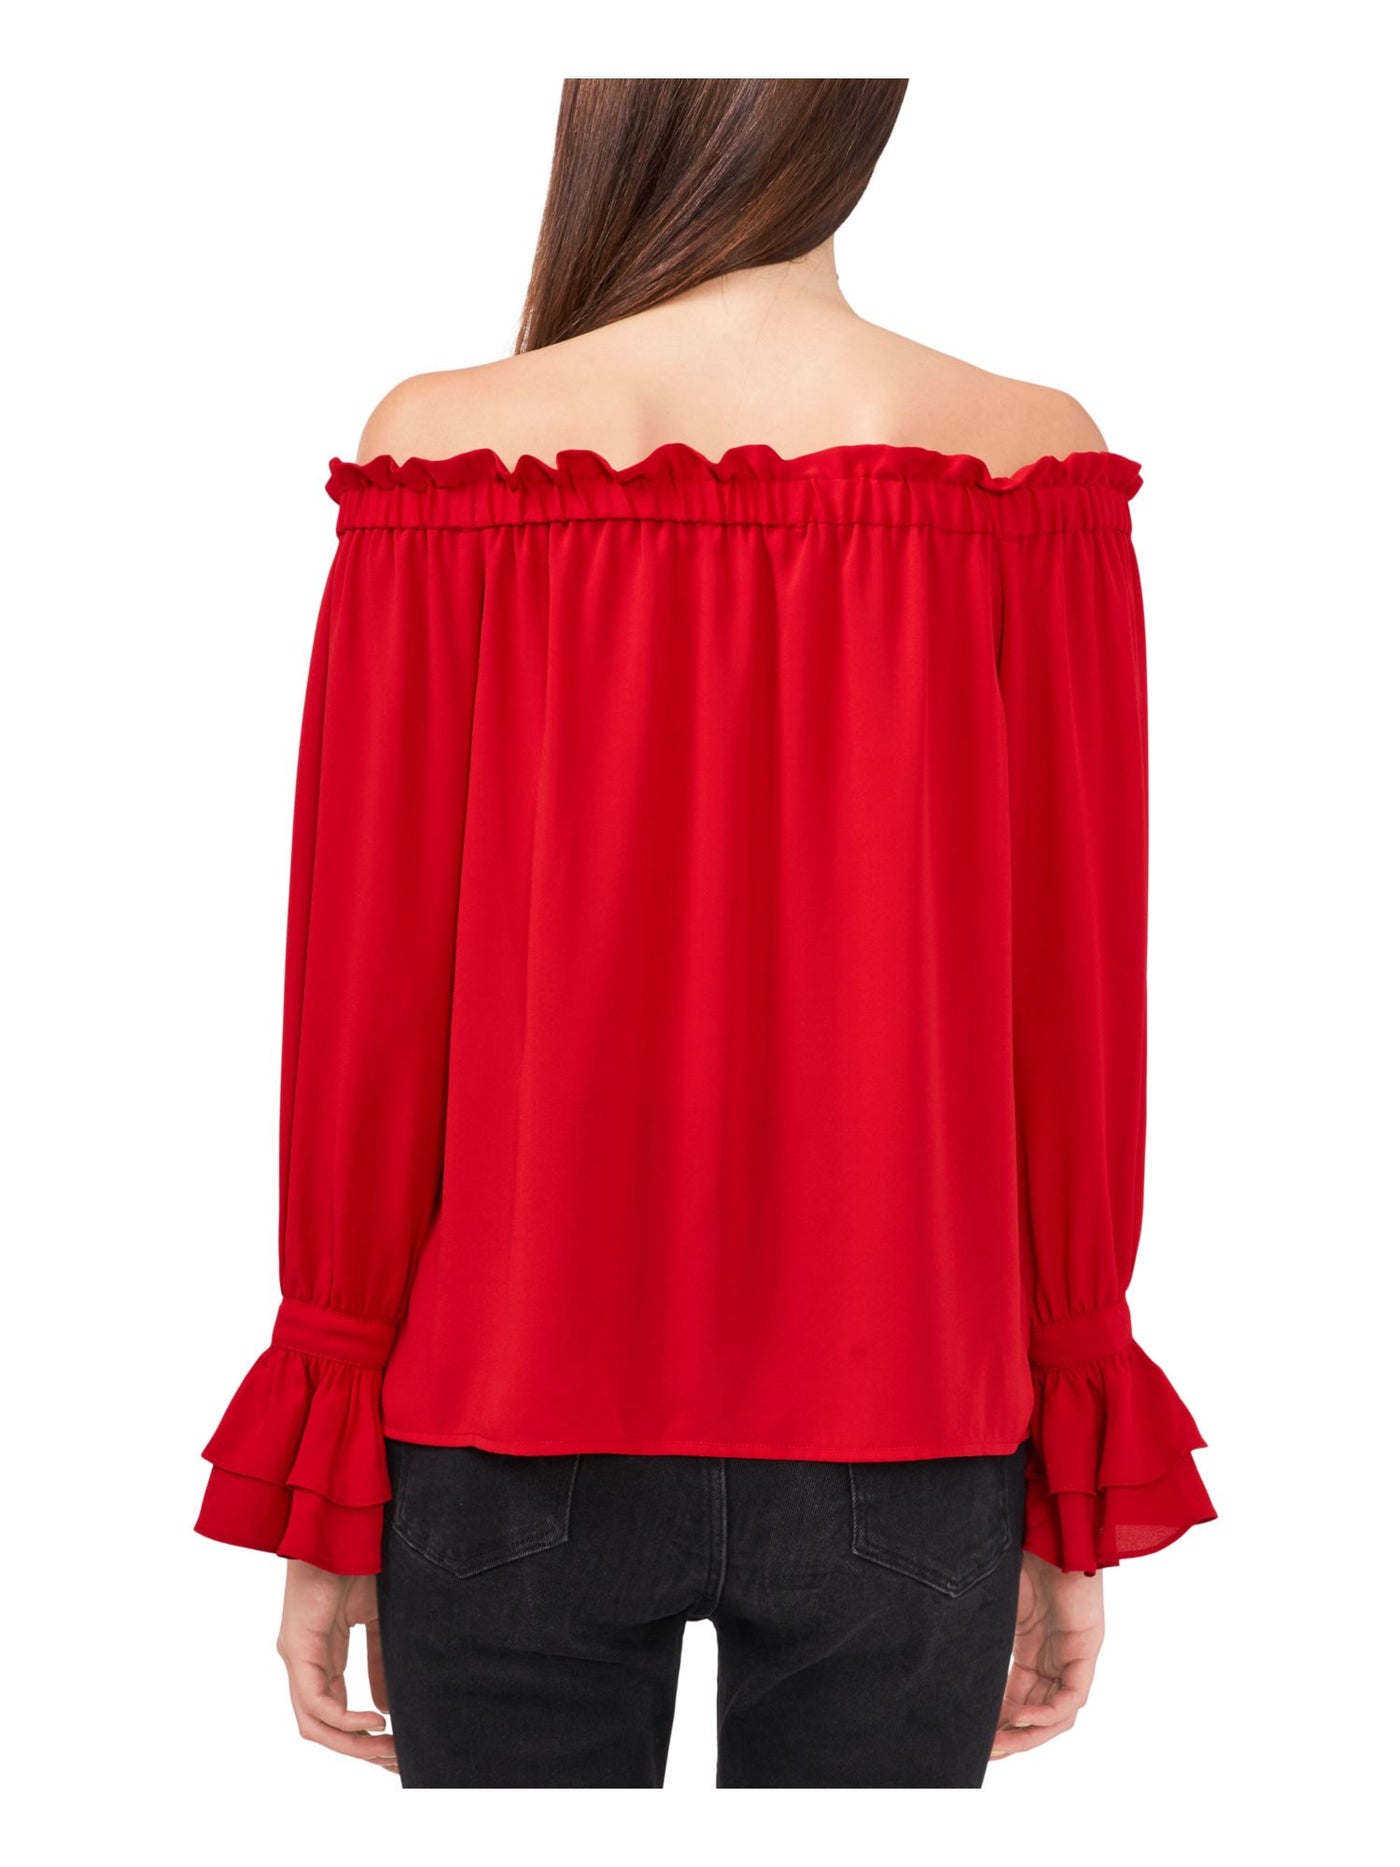 RILEY&RAE Womens Red Ruffled Unlined Bow Detail Sheer Long Sleeve Off Shoulder Blouse XL